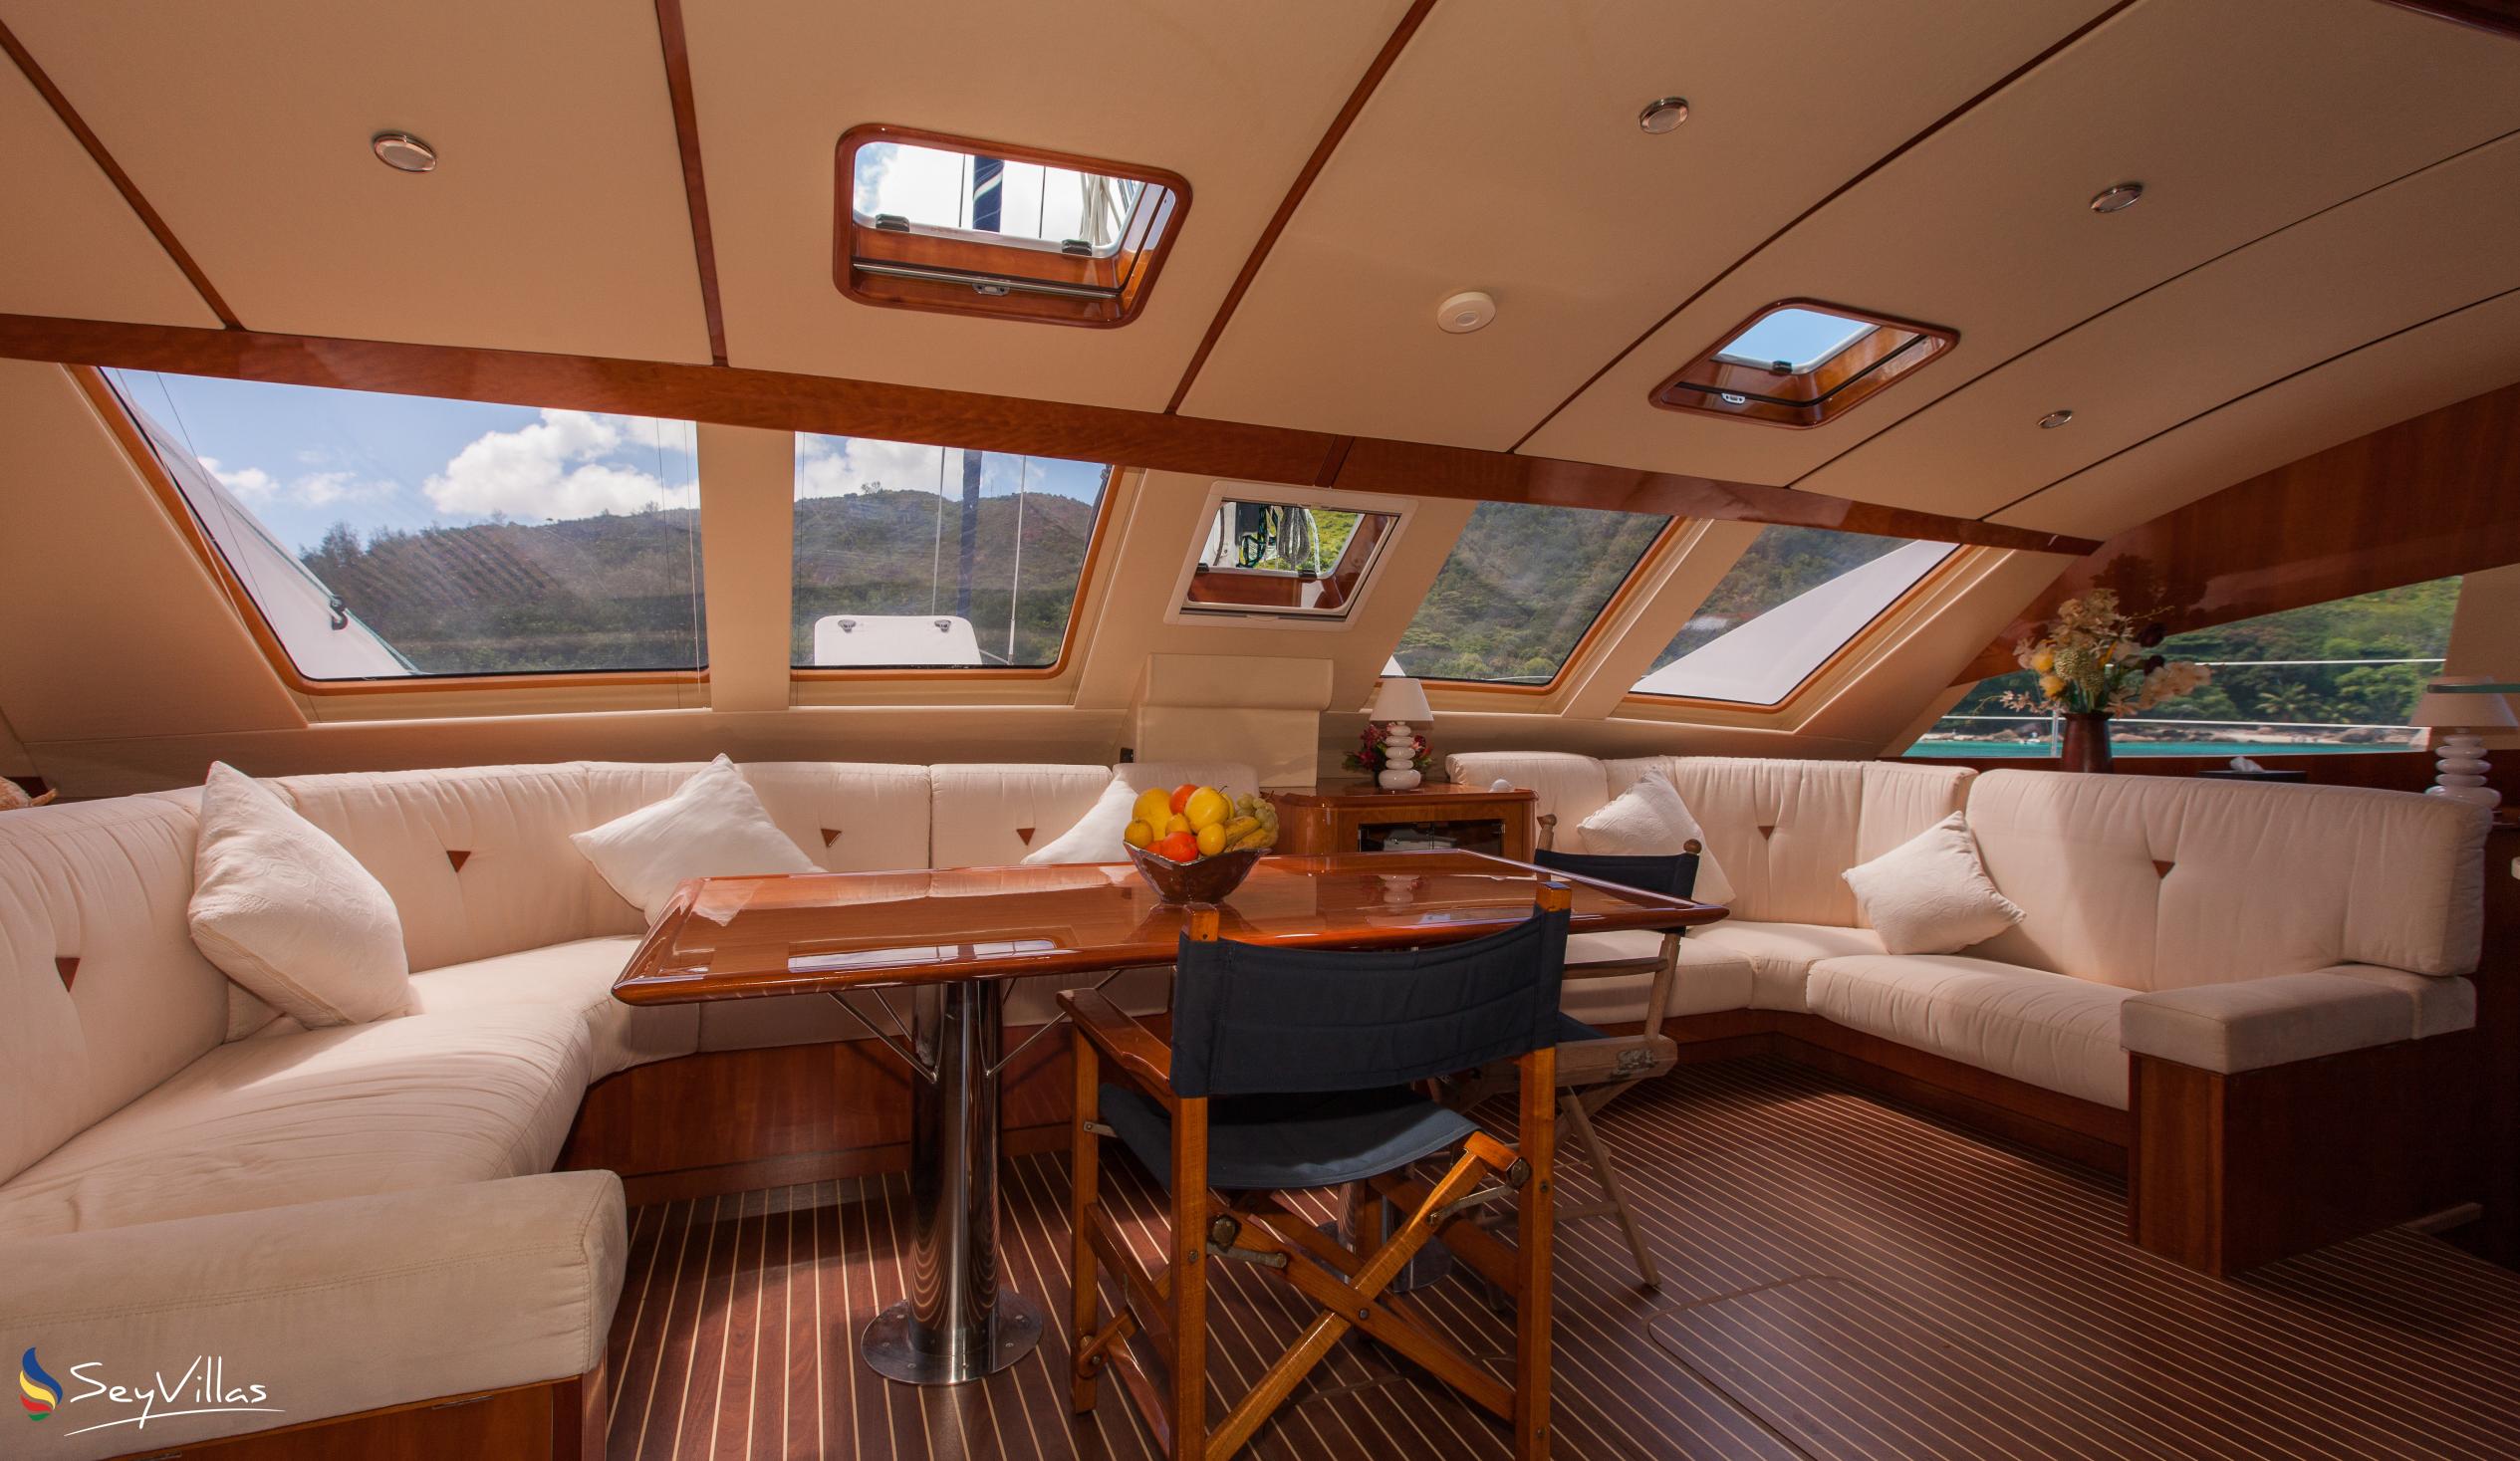 Foto 83: Seyscapes Yacht Charter - Charter Complet Cirrus - Seychelles (Seychelles)